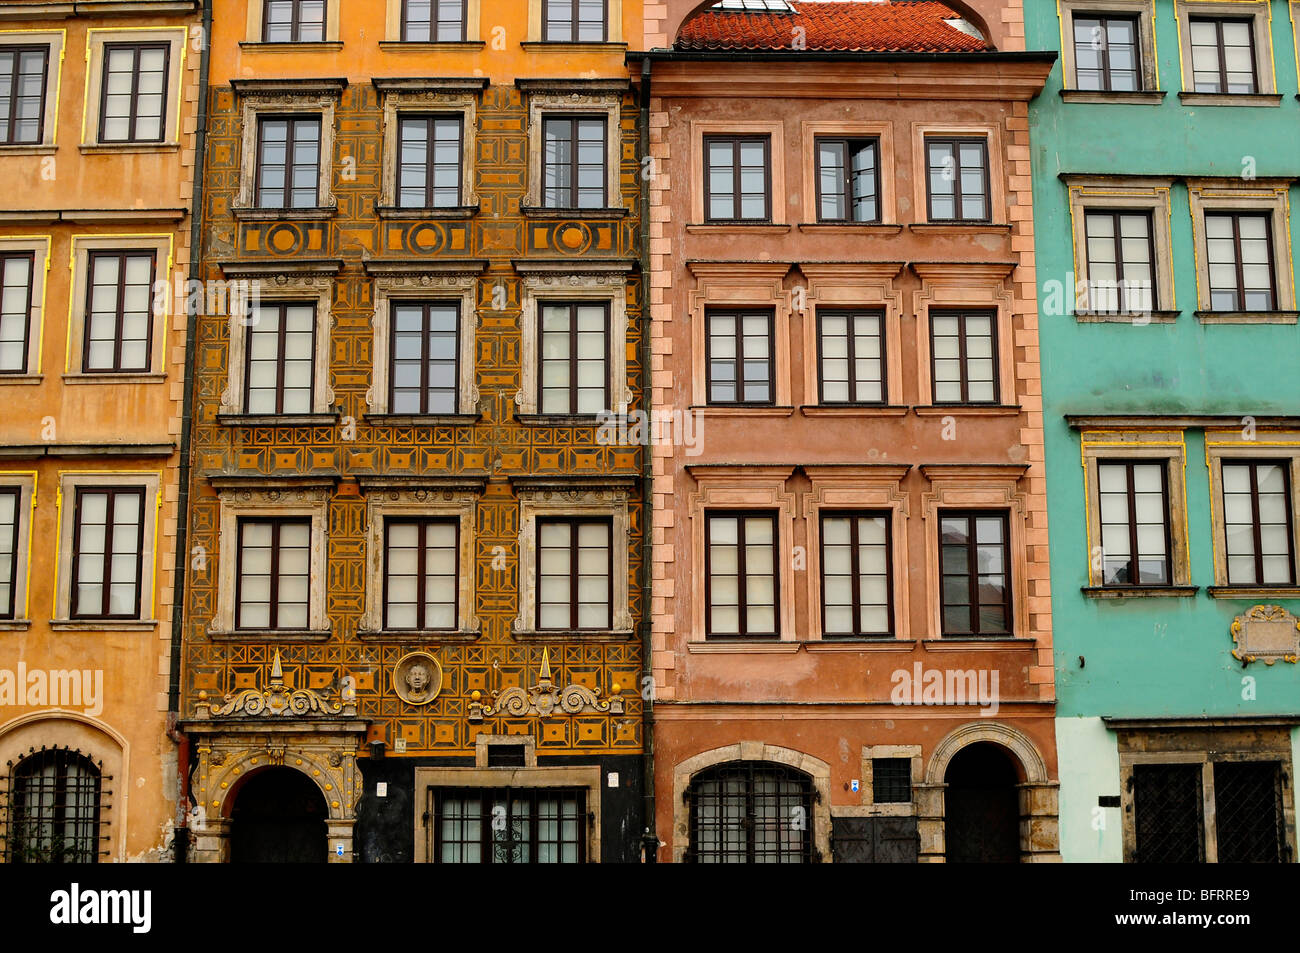 Buildings in the Old Town, Warsaw, Poland Stock Photo